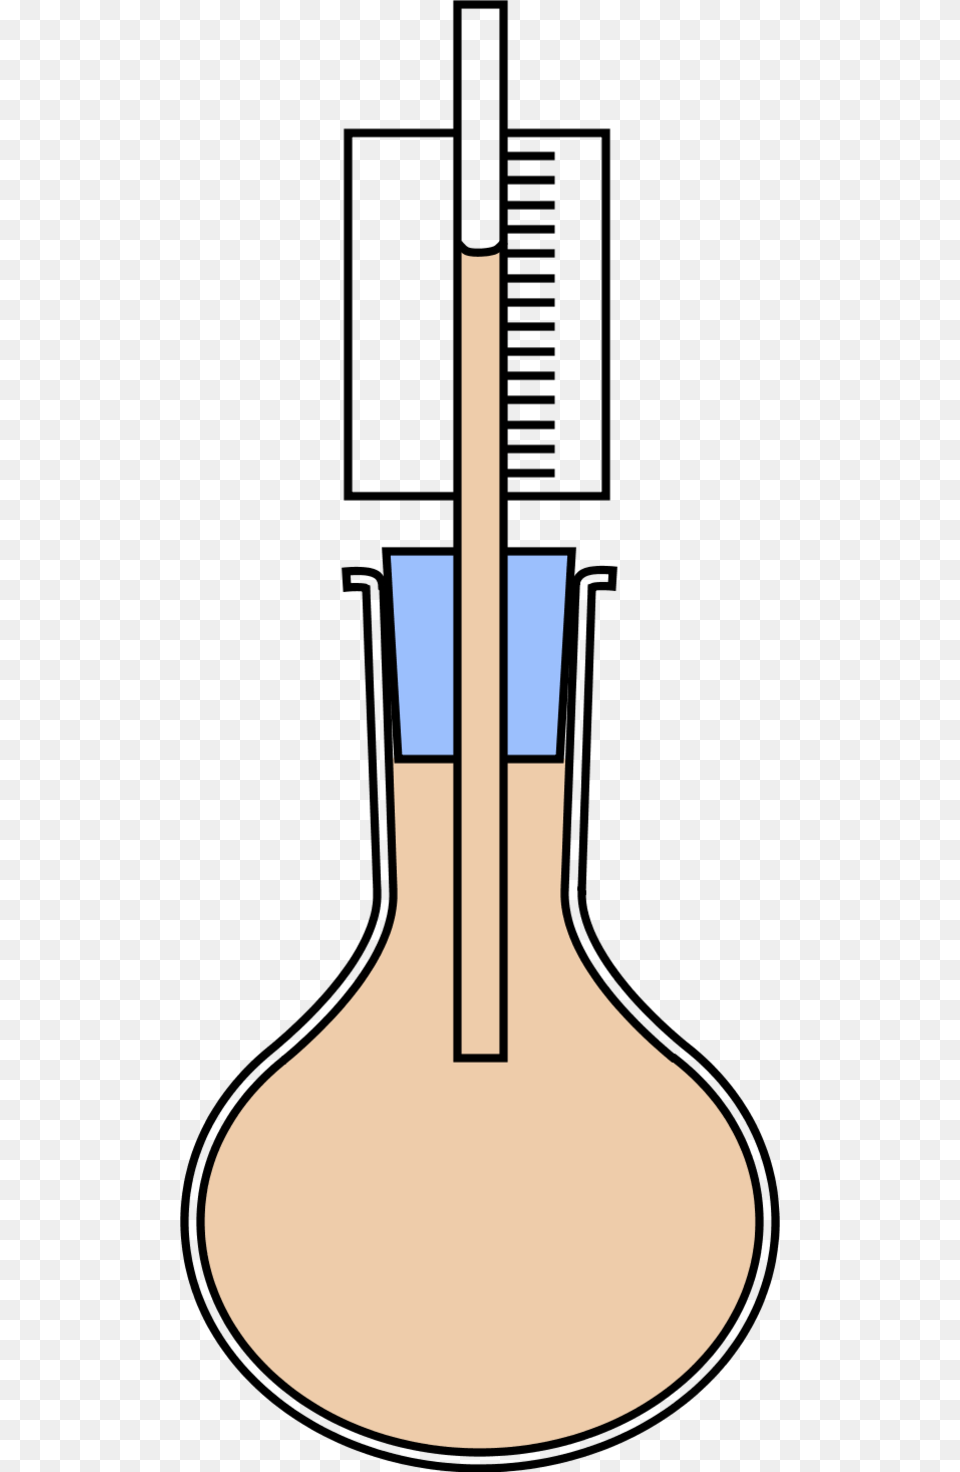 Laboratory Flasks Erlenmeyer Flask Thermal Expansion Expansion Of Liquid Experiment, Jar, Cutlery, Oars Png Image